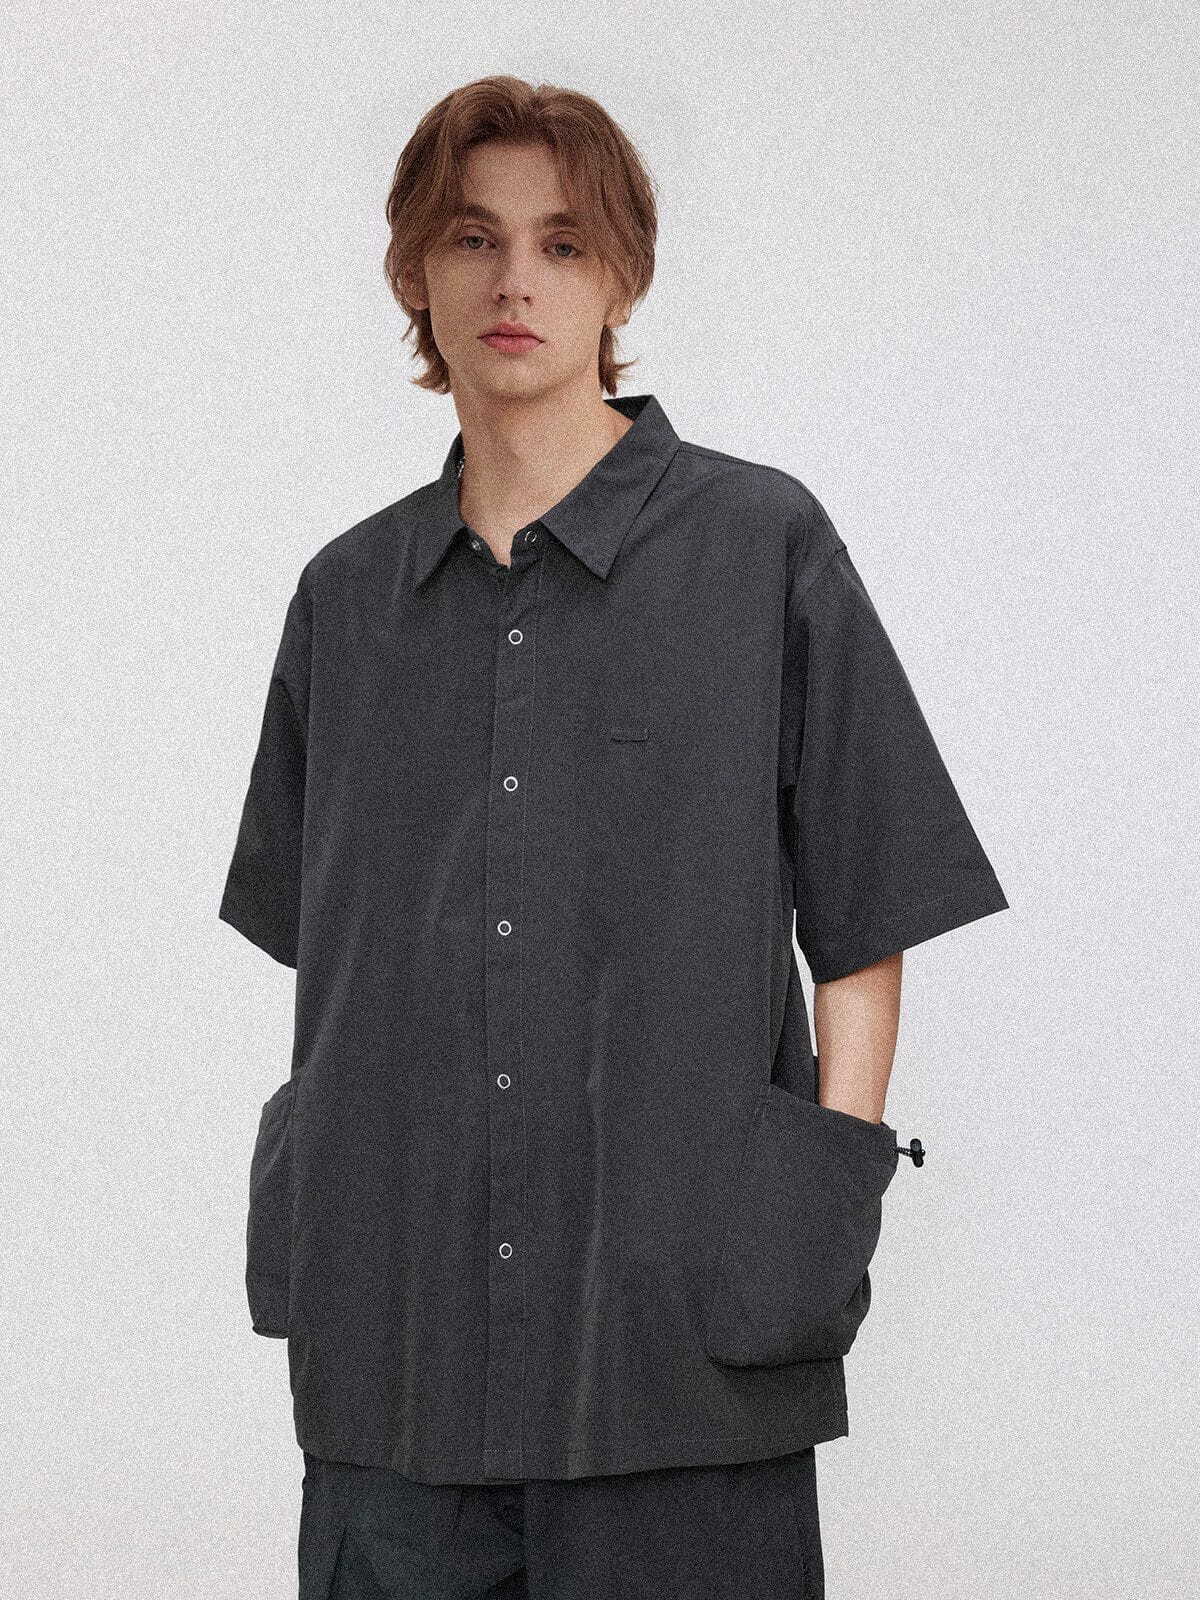 chic solid side pocket shirts   youthful streetwear staple 3937